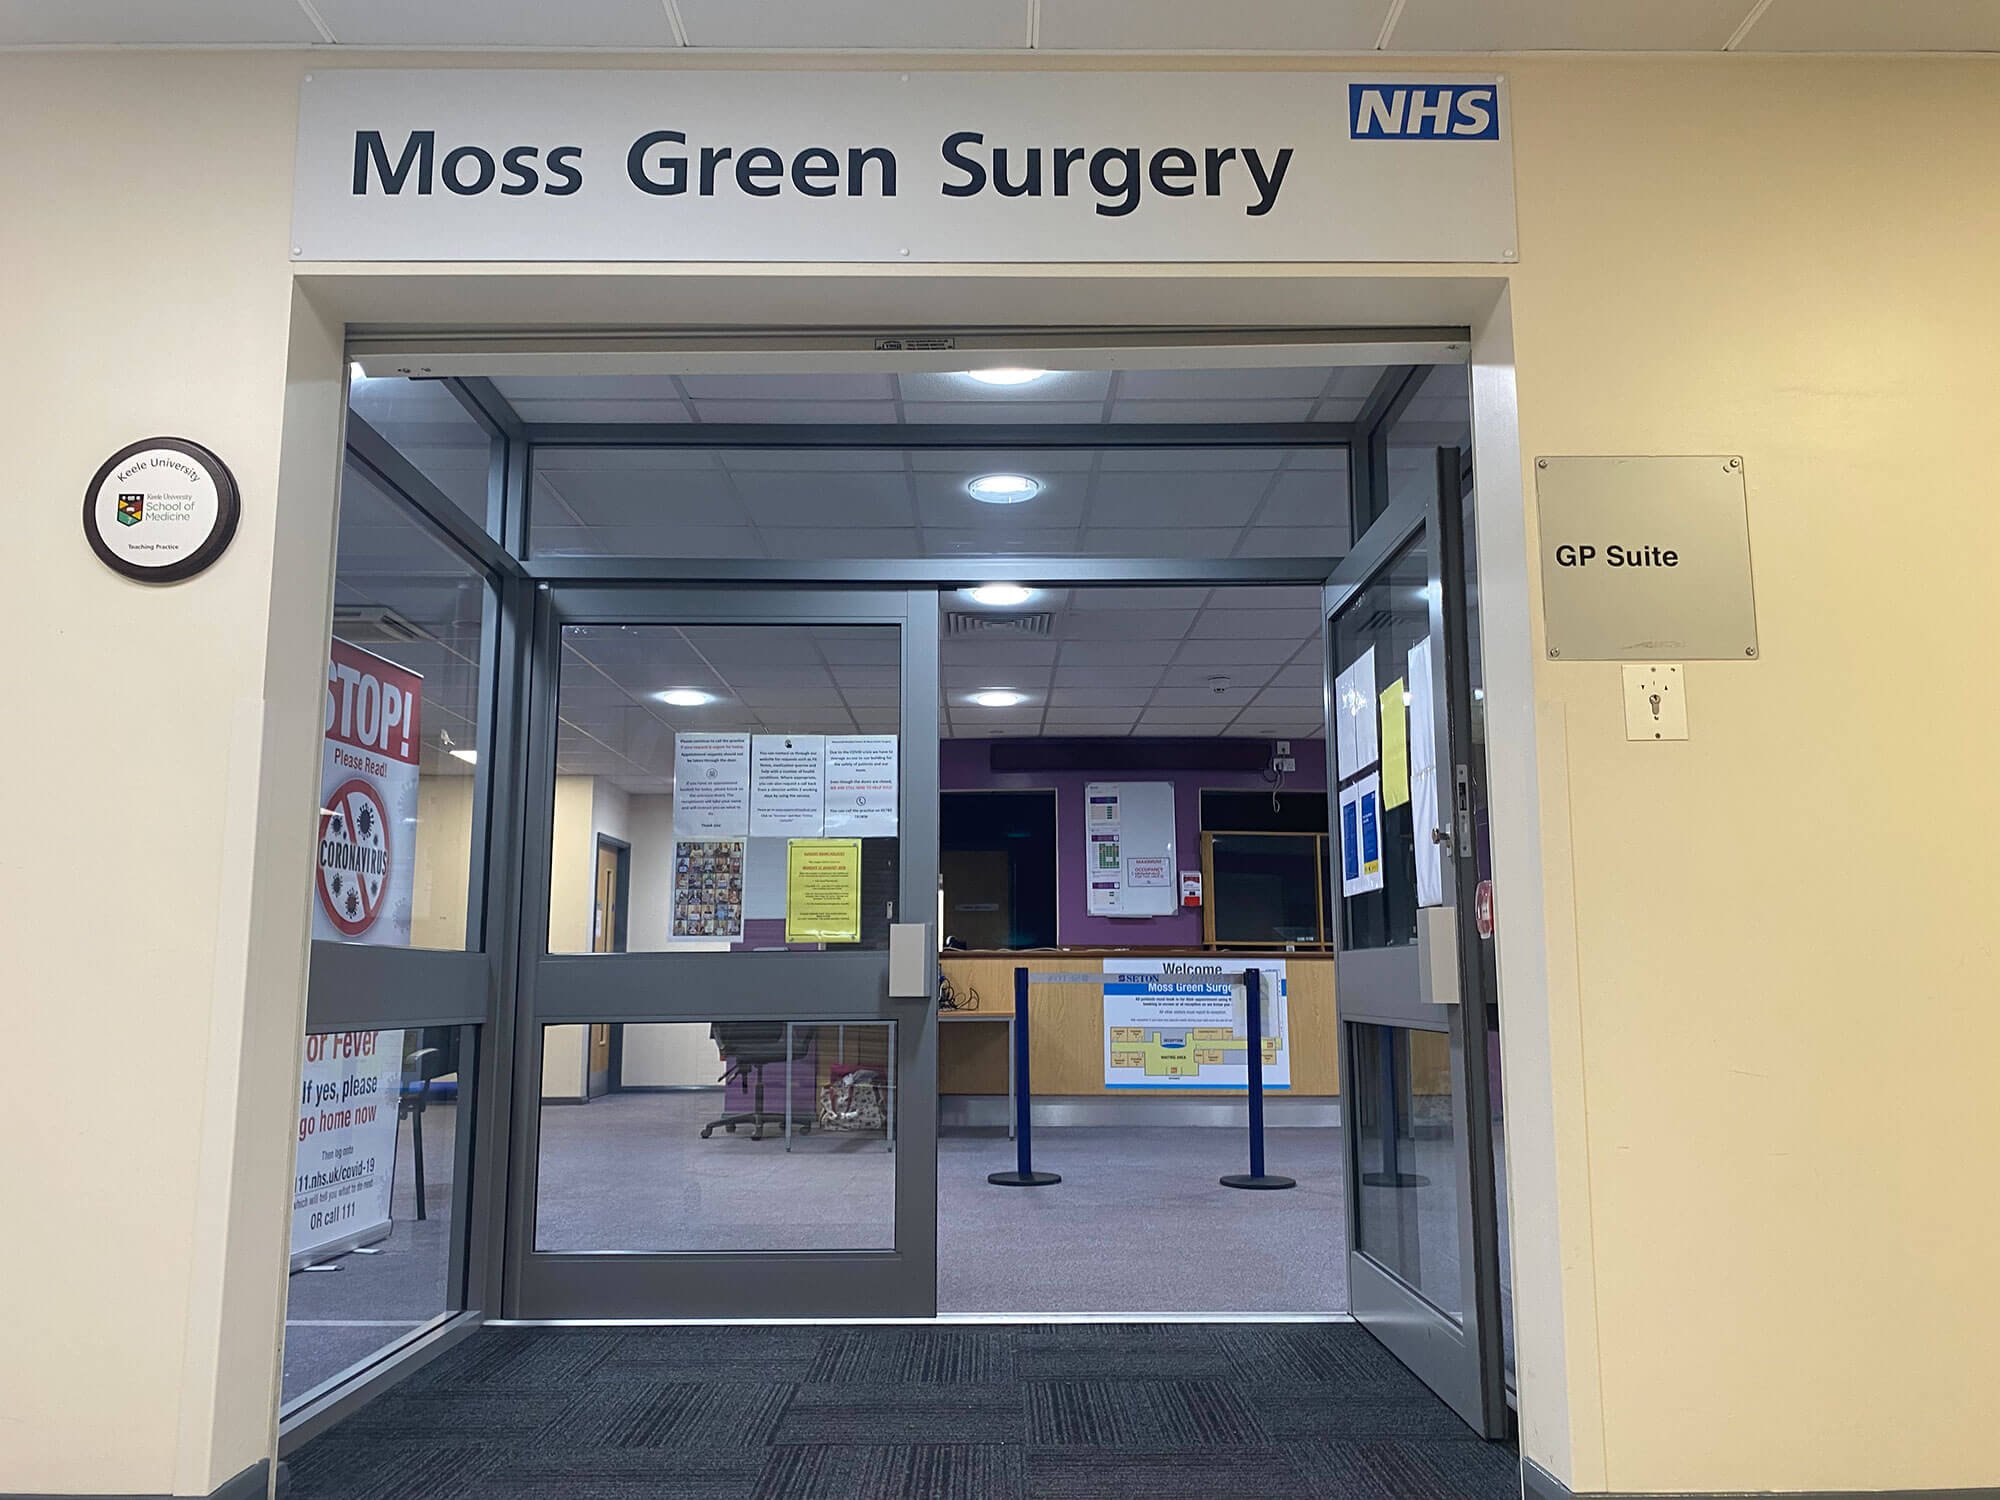 View of the entrant to Moss Green Surgery GP Suite